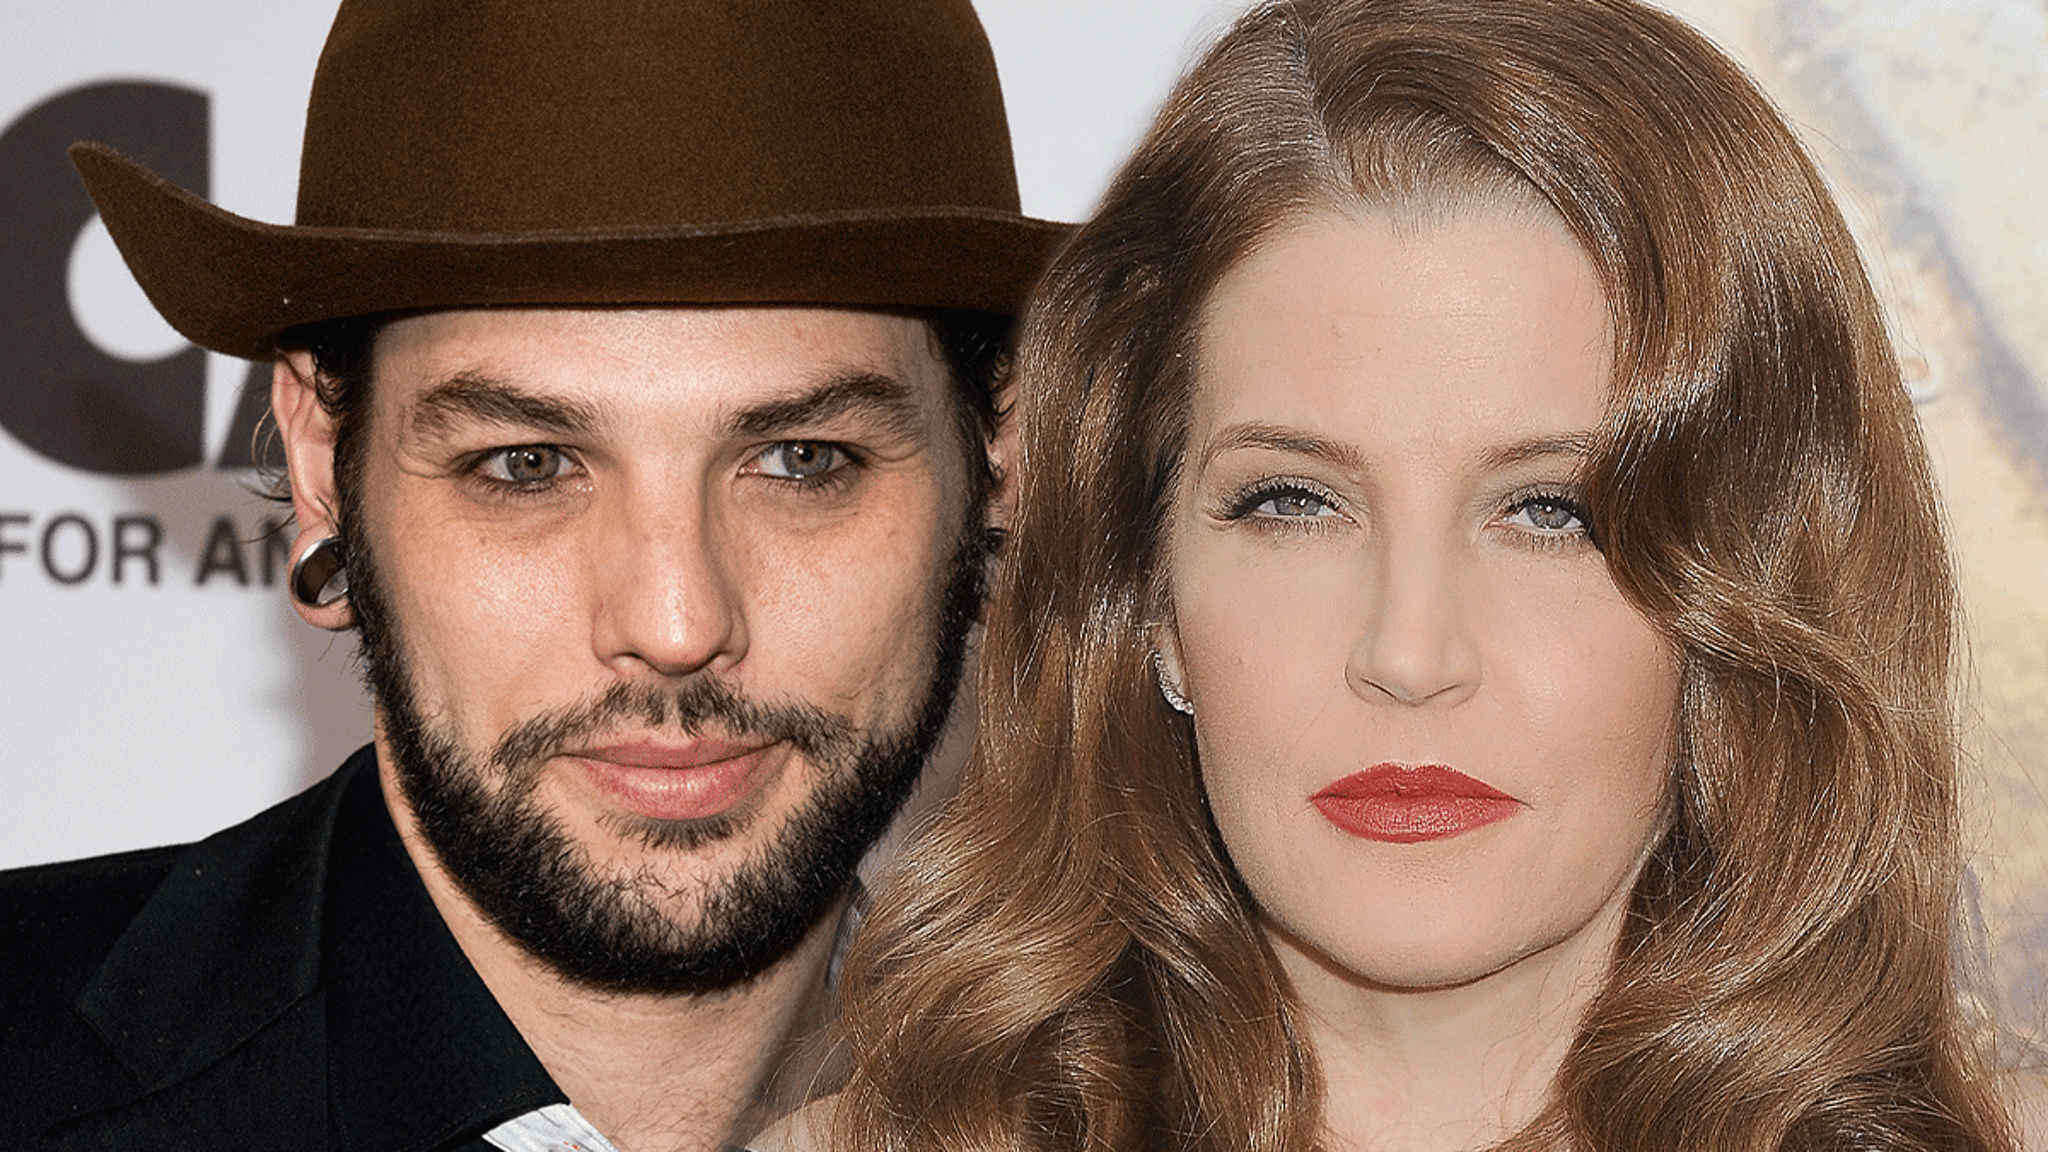 Lisa Marie Presley’s Half-Brother Claims He Was Nearly Killed by Camel Before Her Death